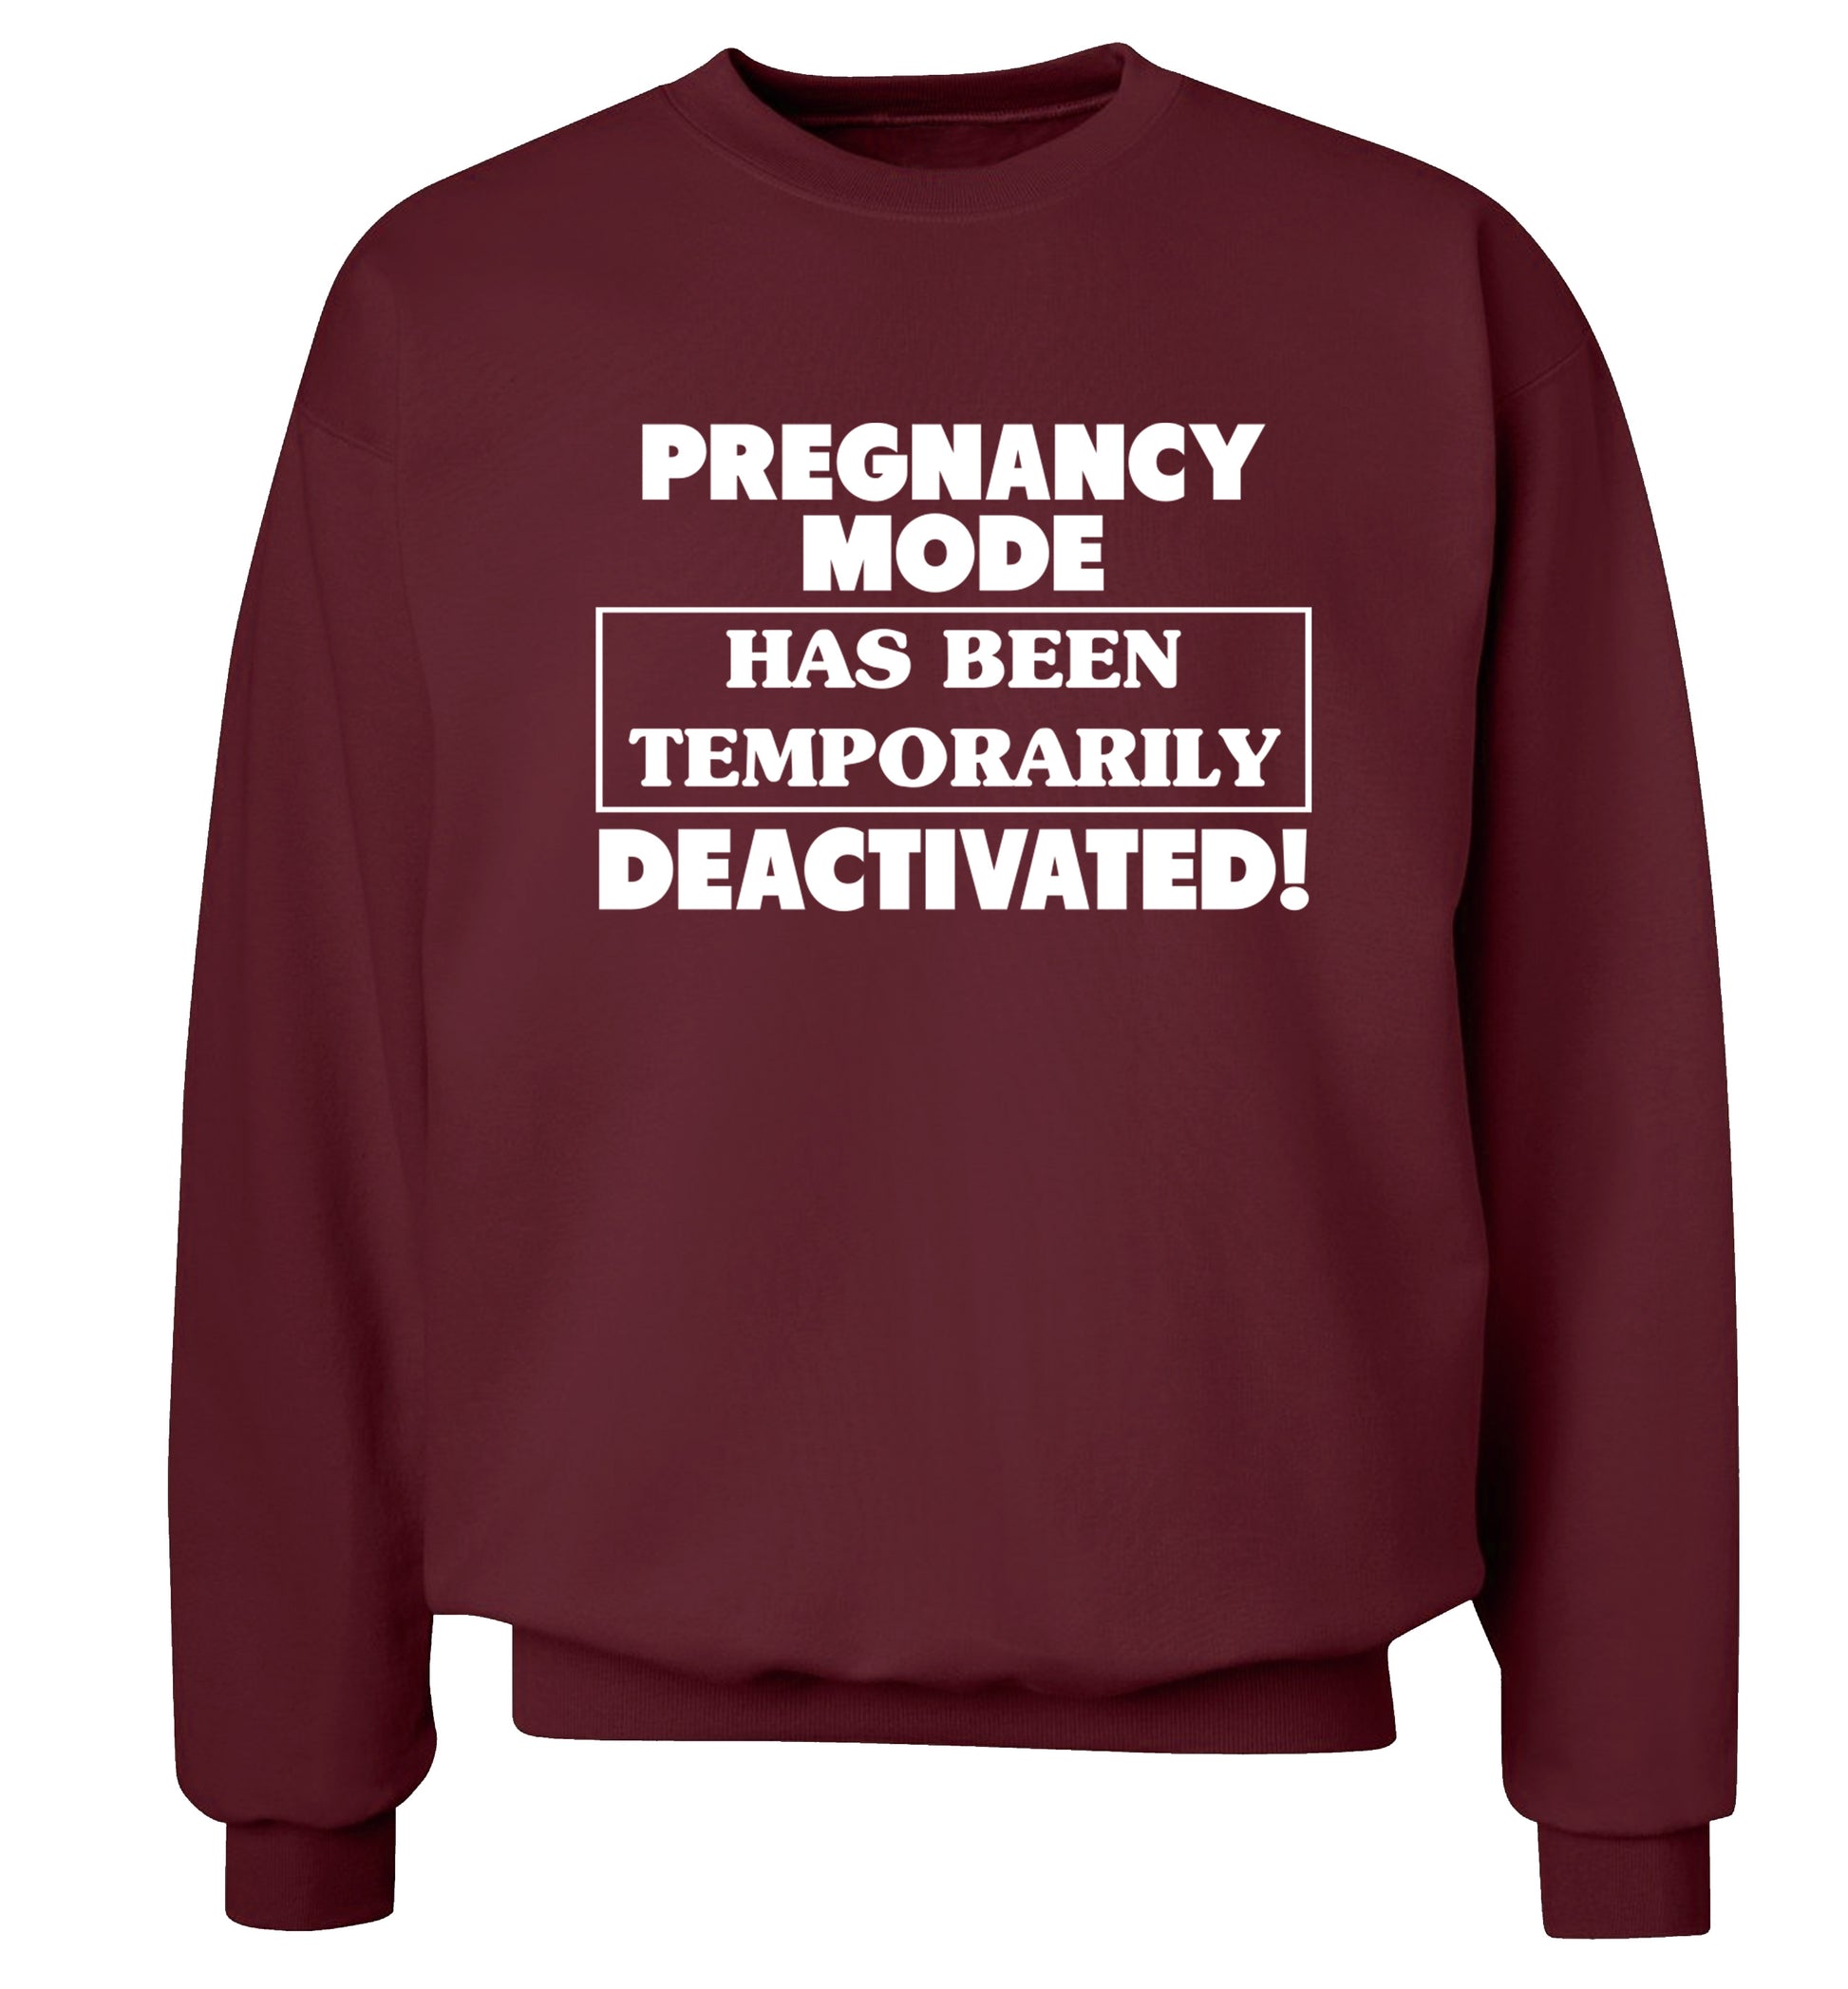 Pregnancy mode has now been temporarily deactivated Adult's unisex maroon Sweater 2XL